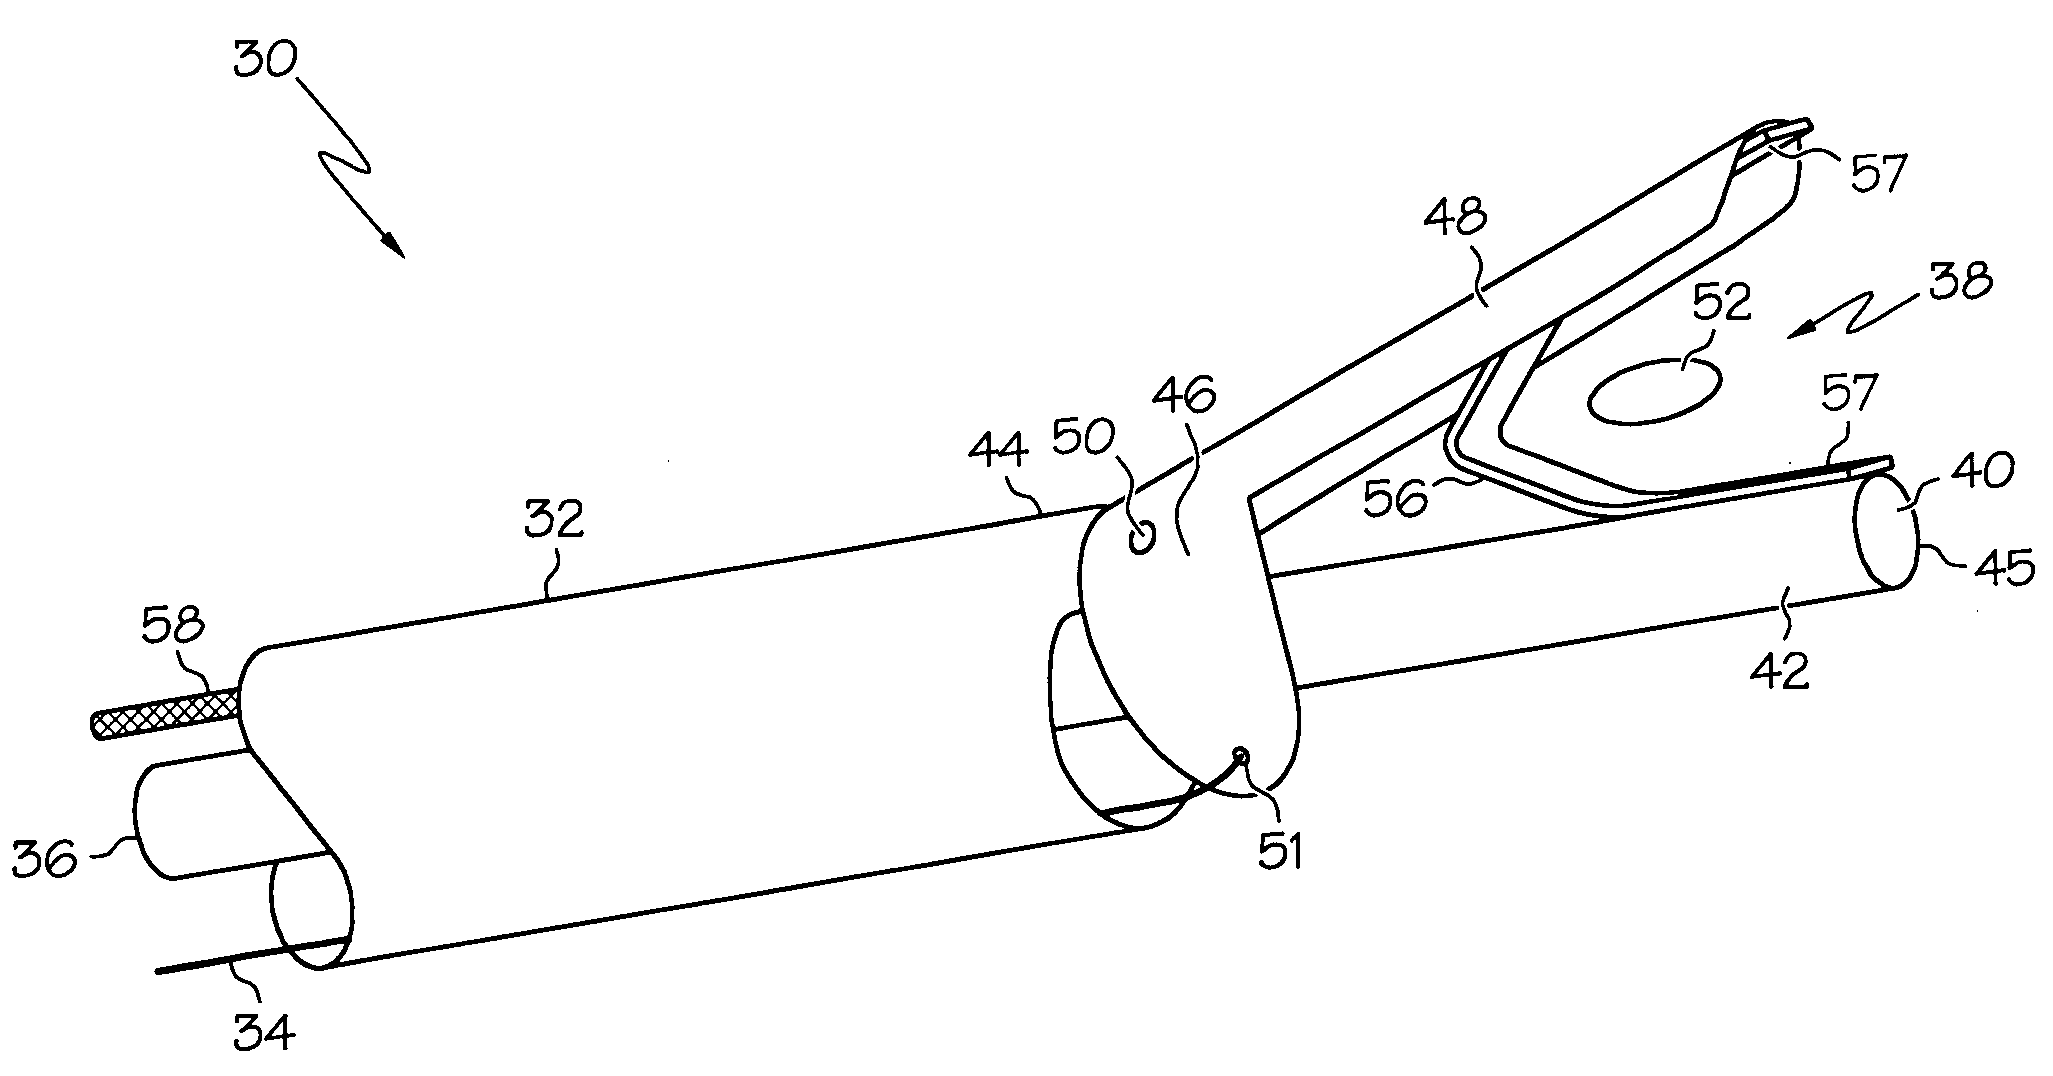 Hybrid energy instrument combined with clip application capability